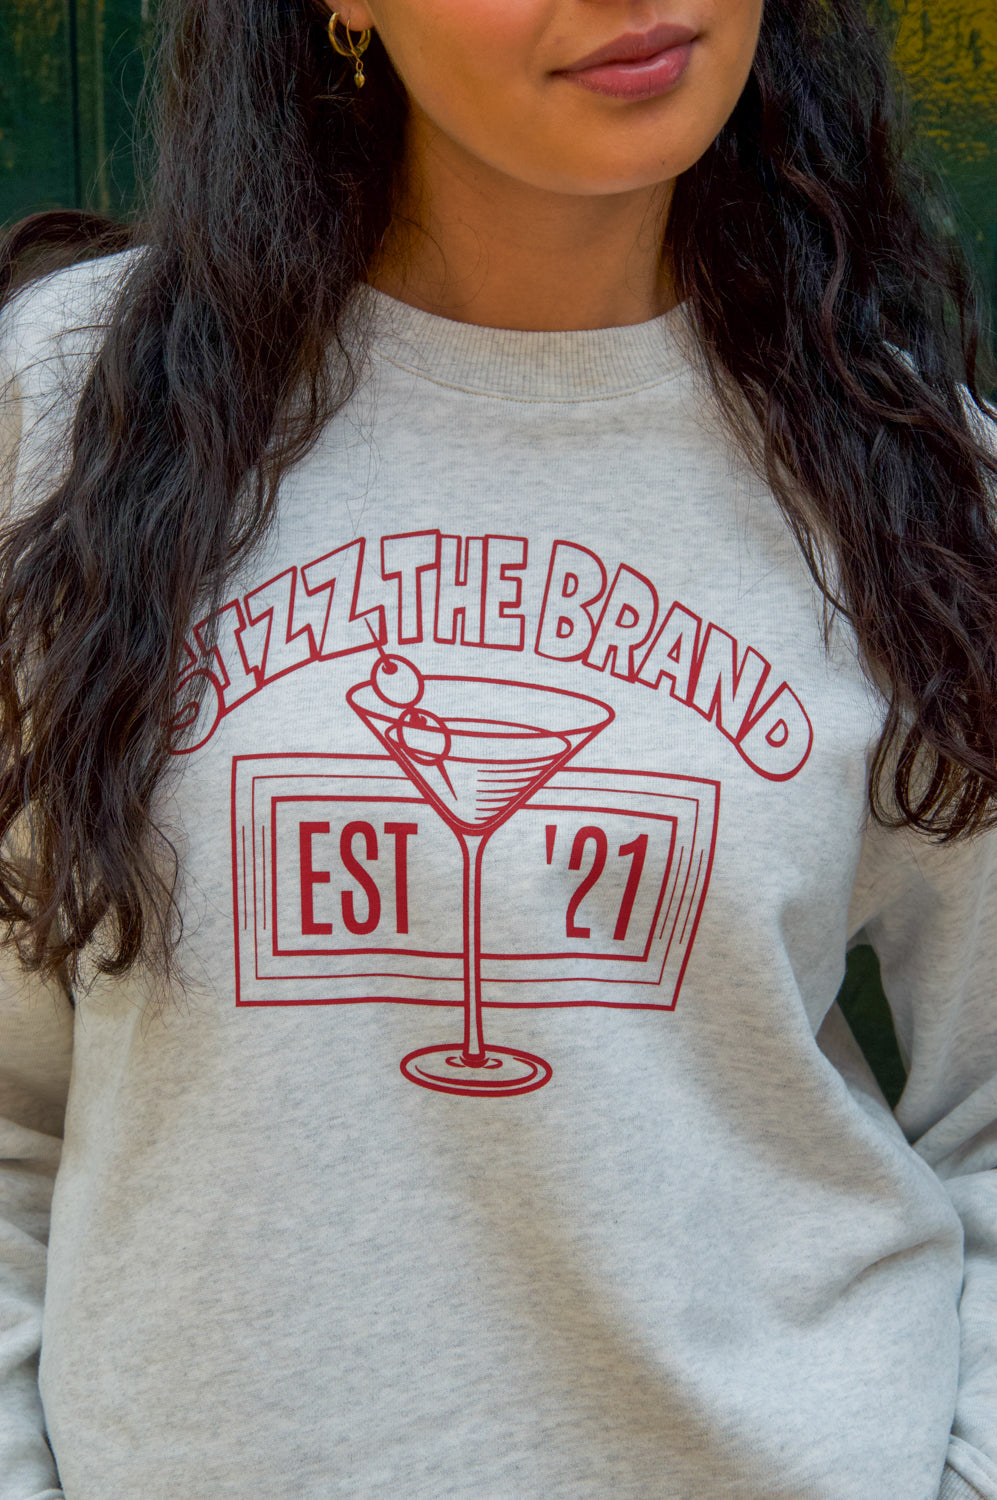 The Cocktail Sweater